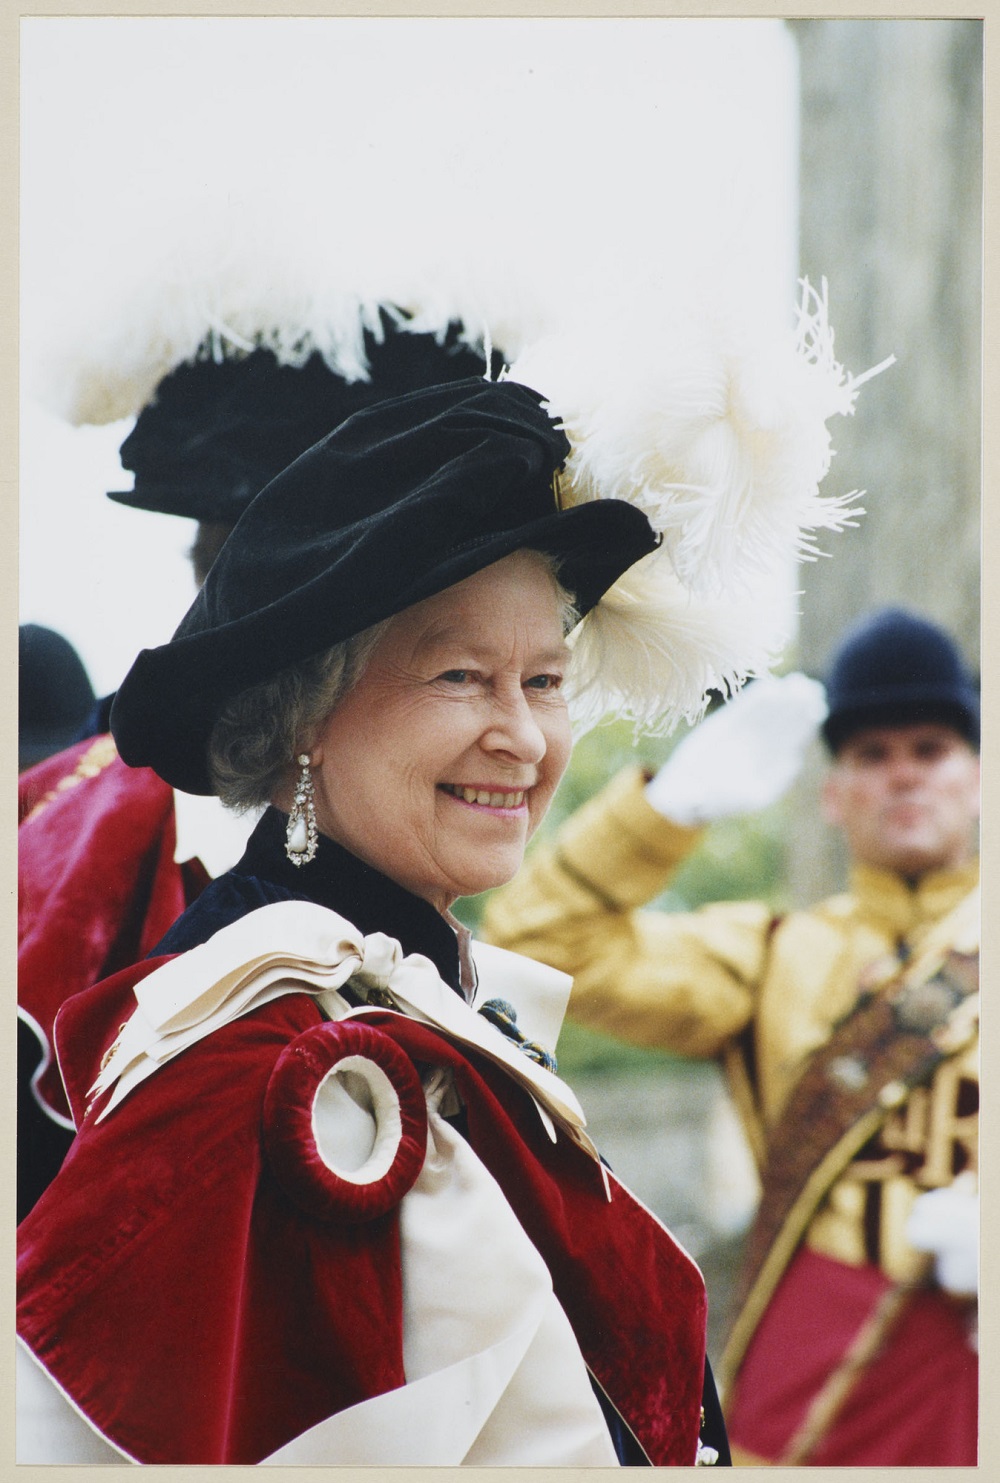 What is Garter Day and which Royals attend The Order of the Garter?